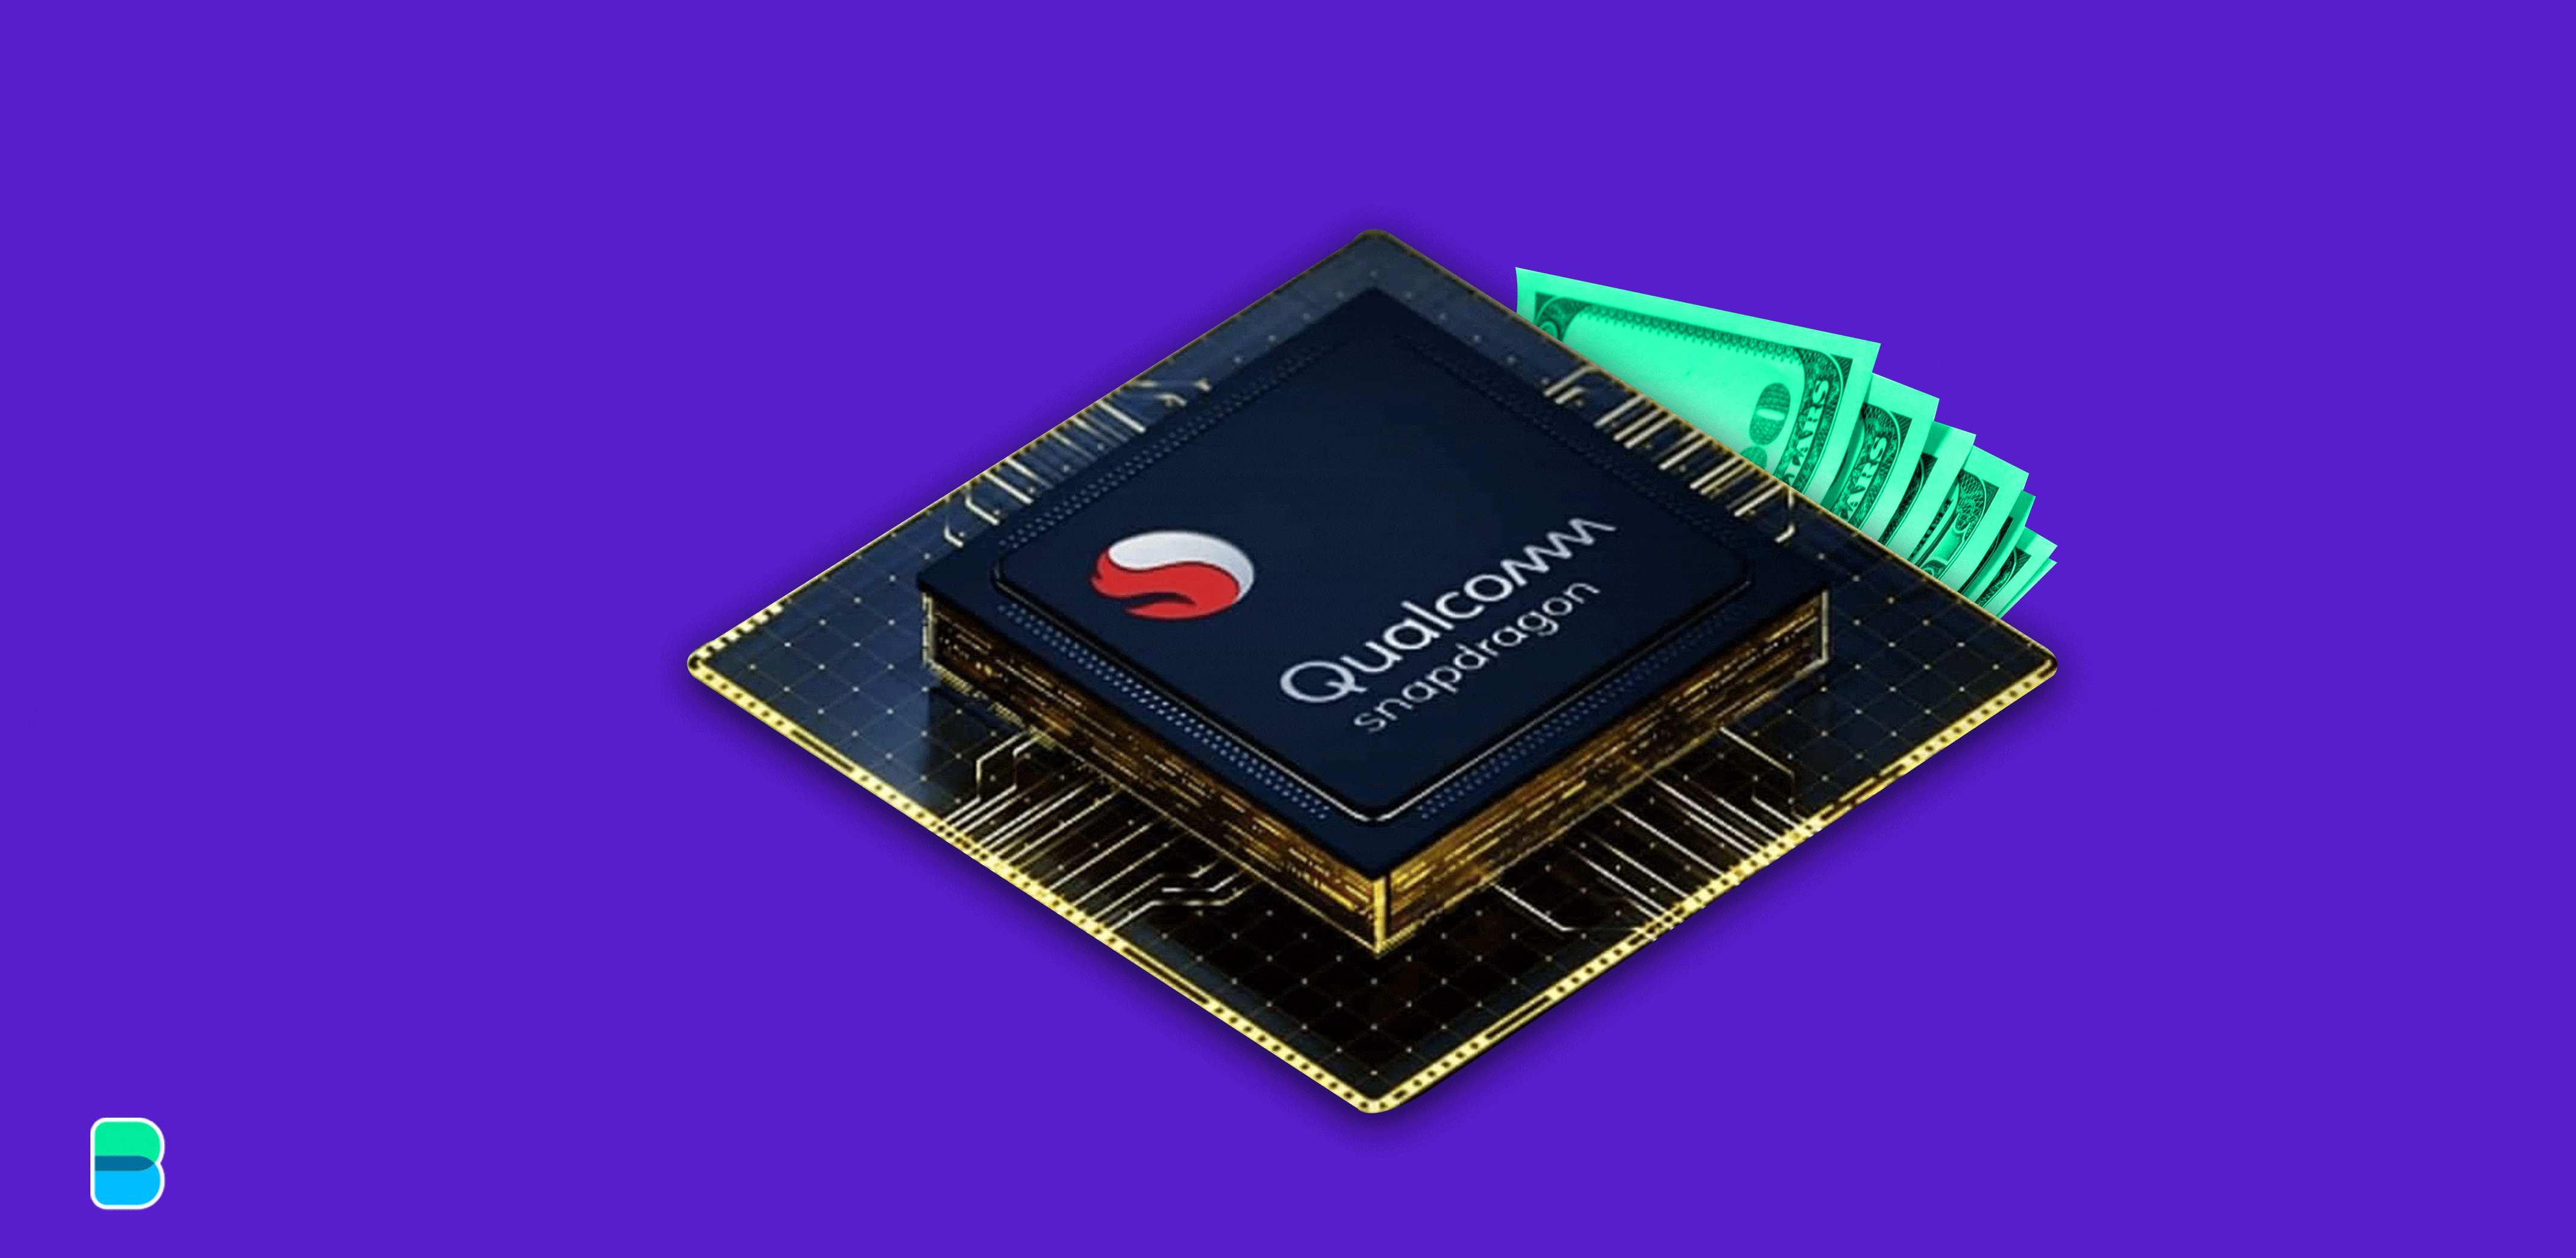 Qualcomm is making bank